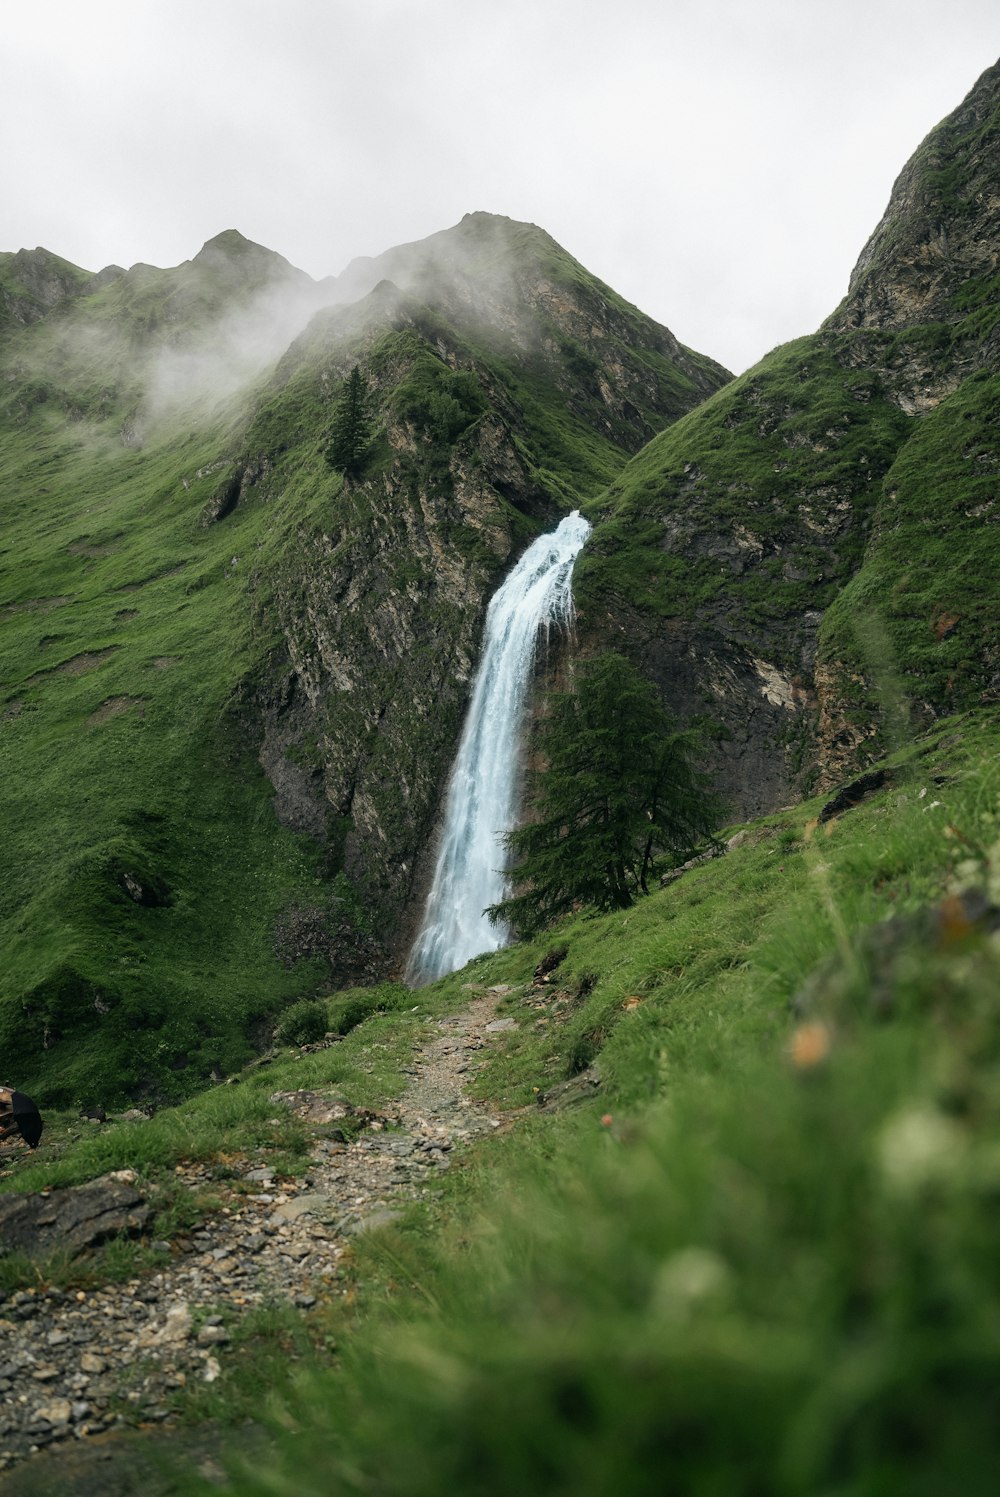 a small waterfall in the middle of a mountain